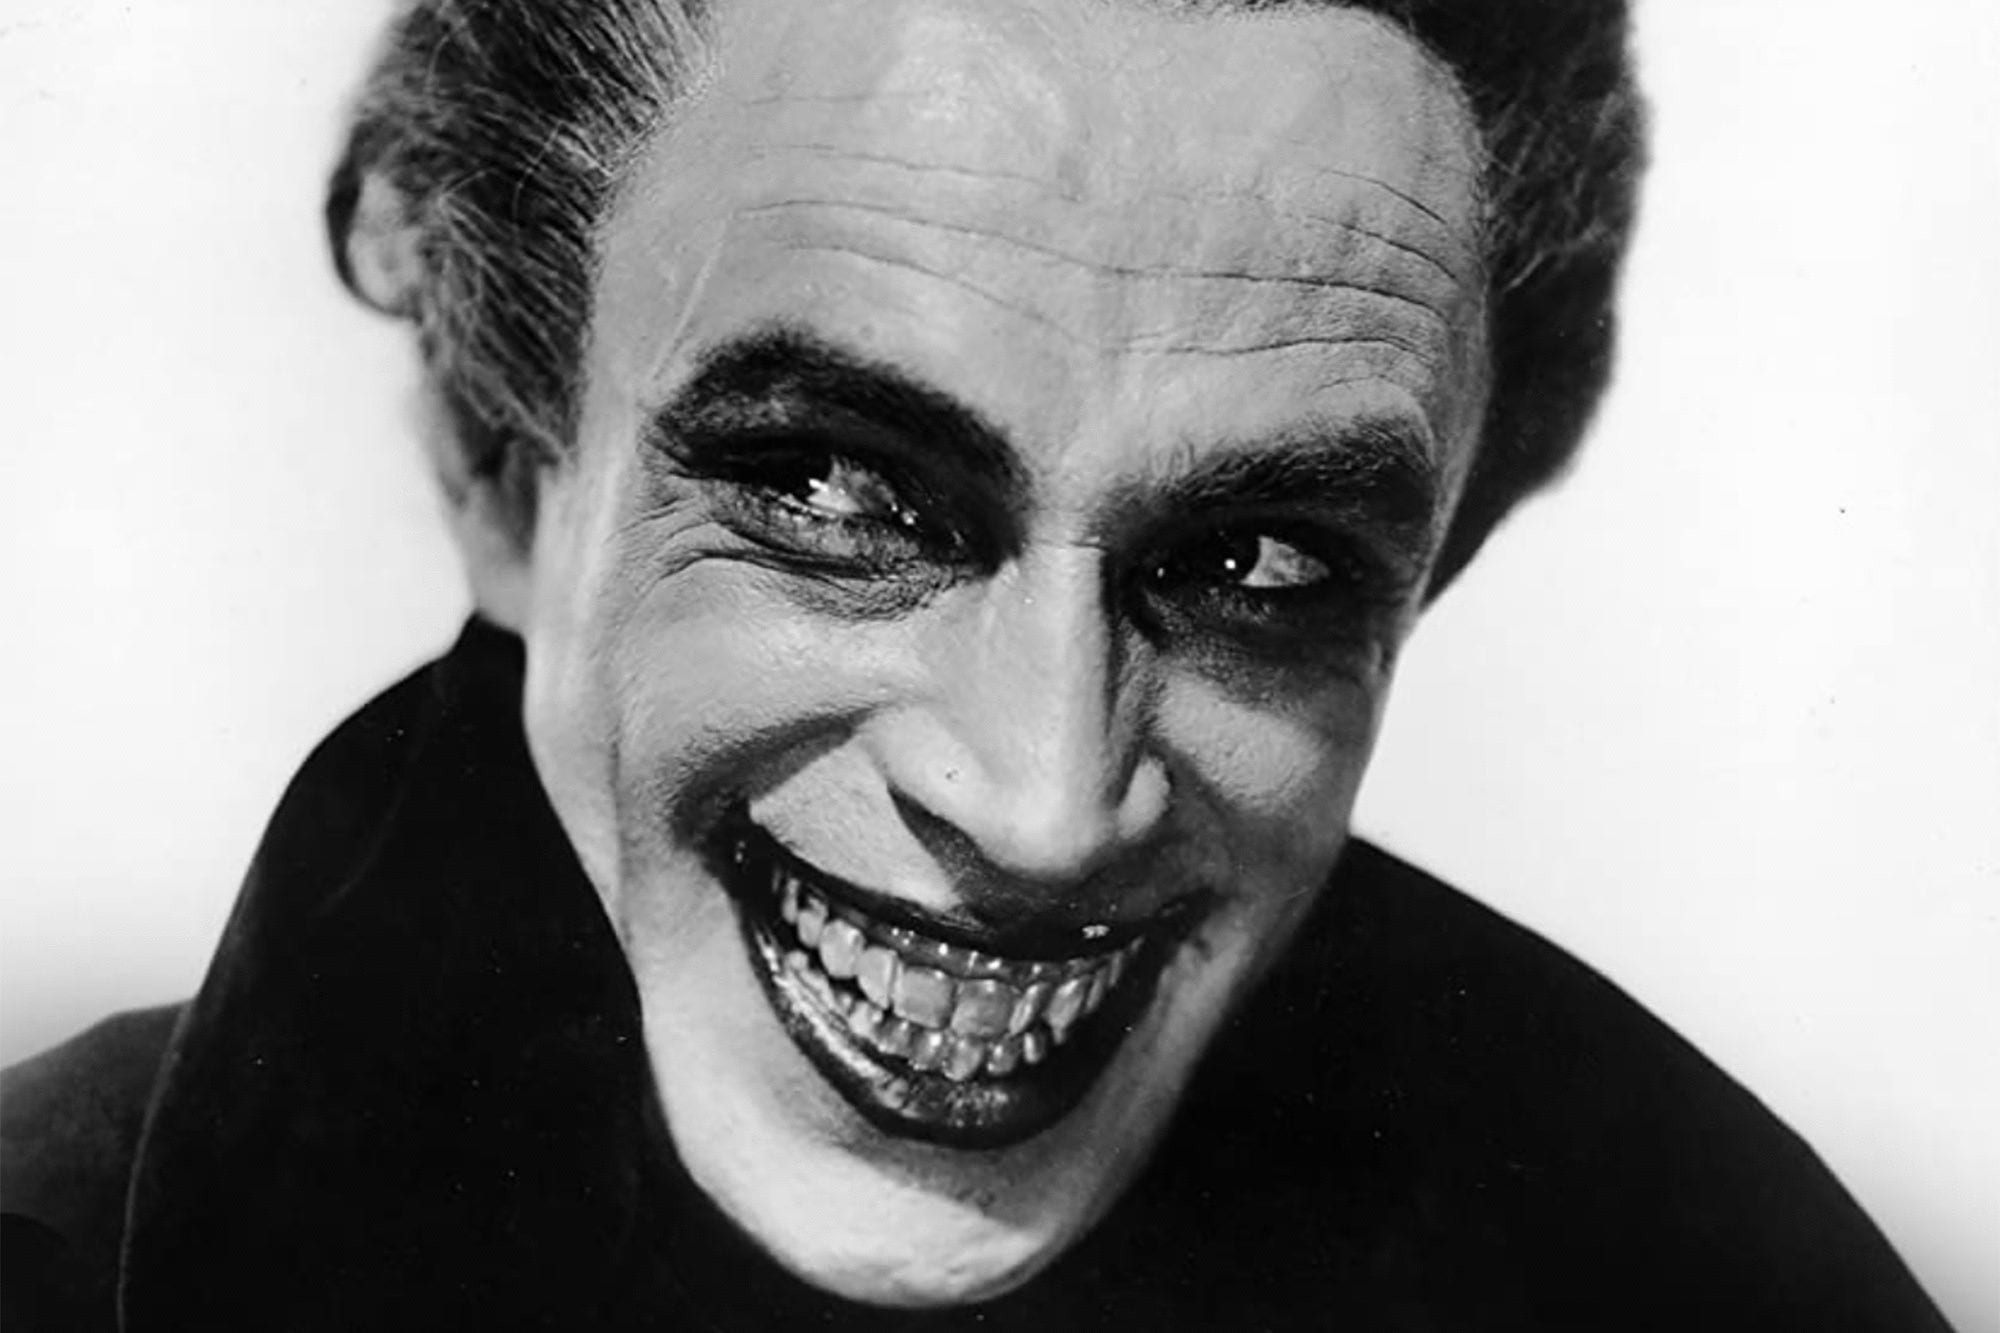 Paul Leni’s Silent Film ‘The Man Who Laughs’ Is Serious Cinema